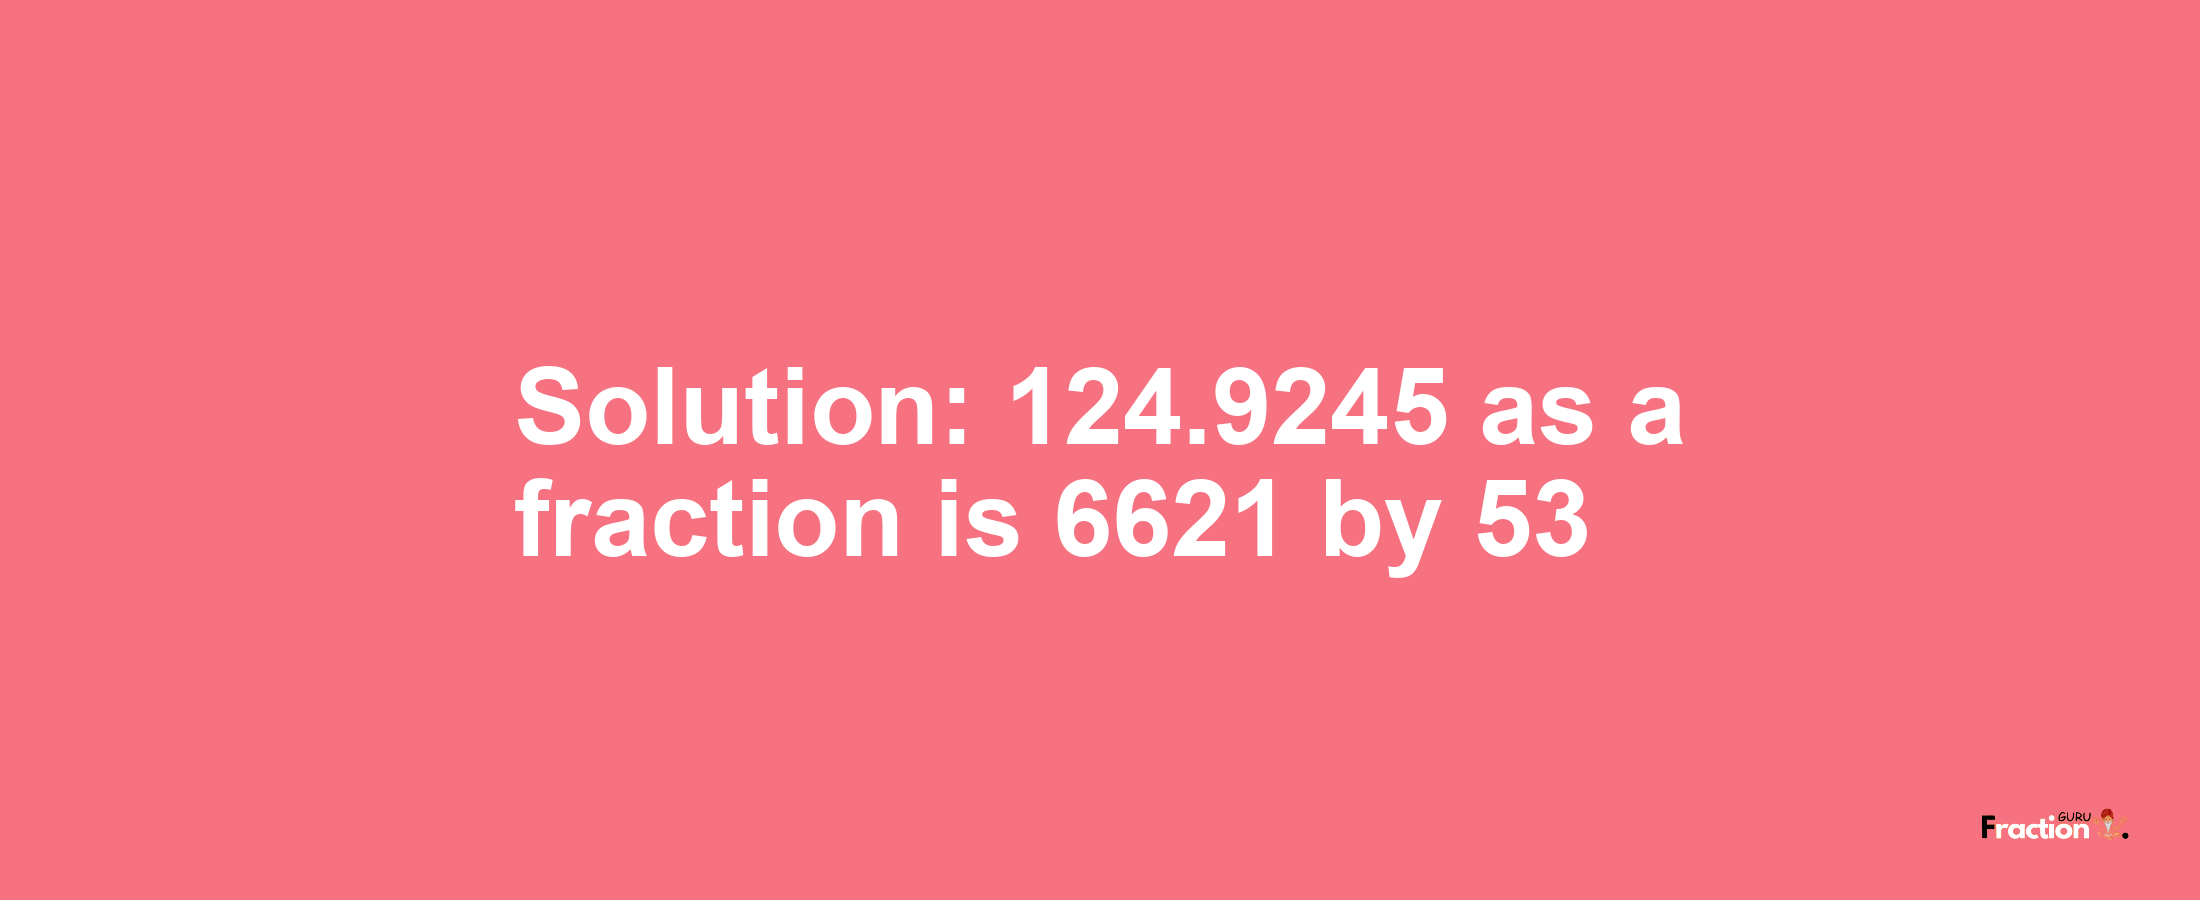 Solution:124.9245 as a fraction is 6621/53